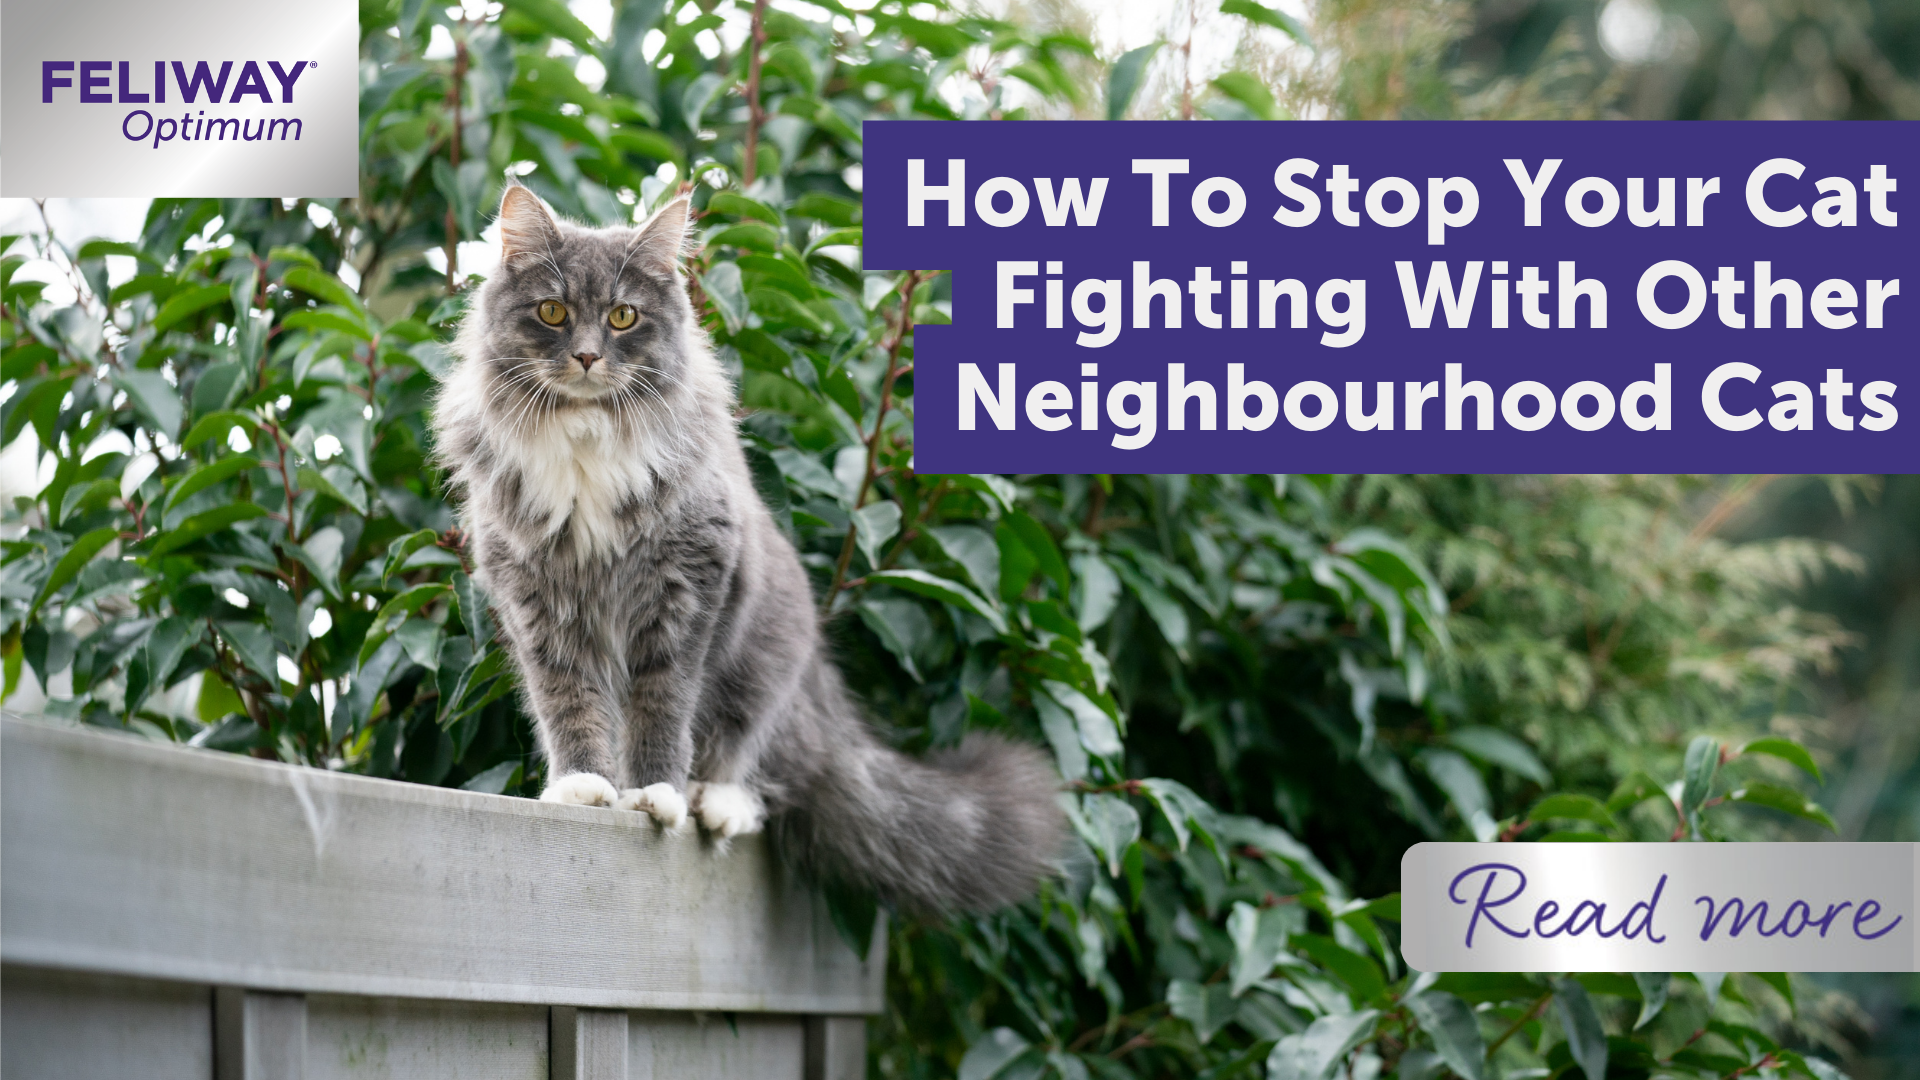 How To Stop Your Cat Fighting With Other Neighbourhood Cats